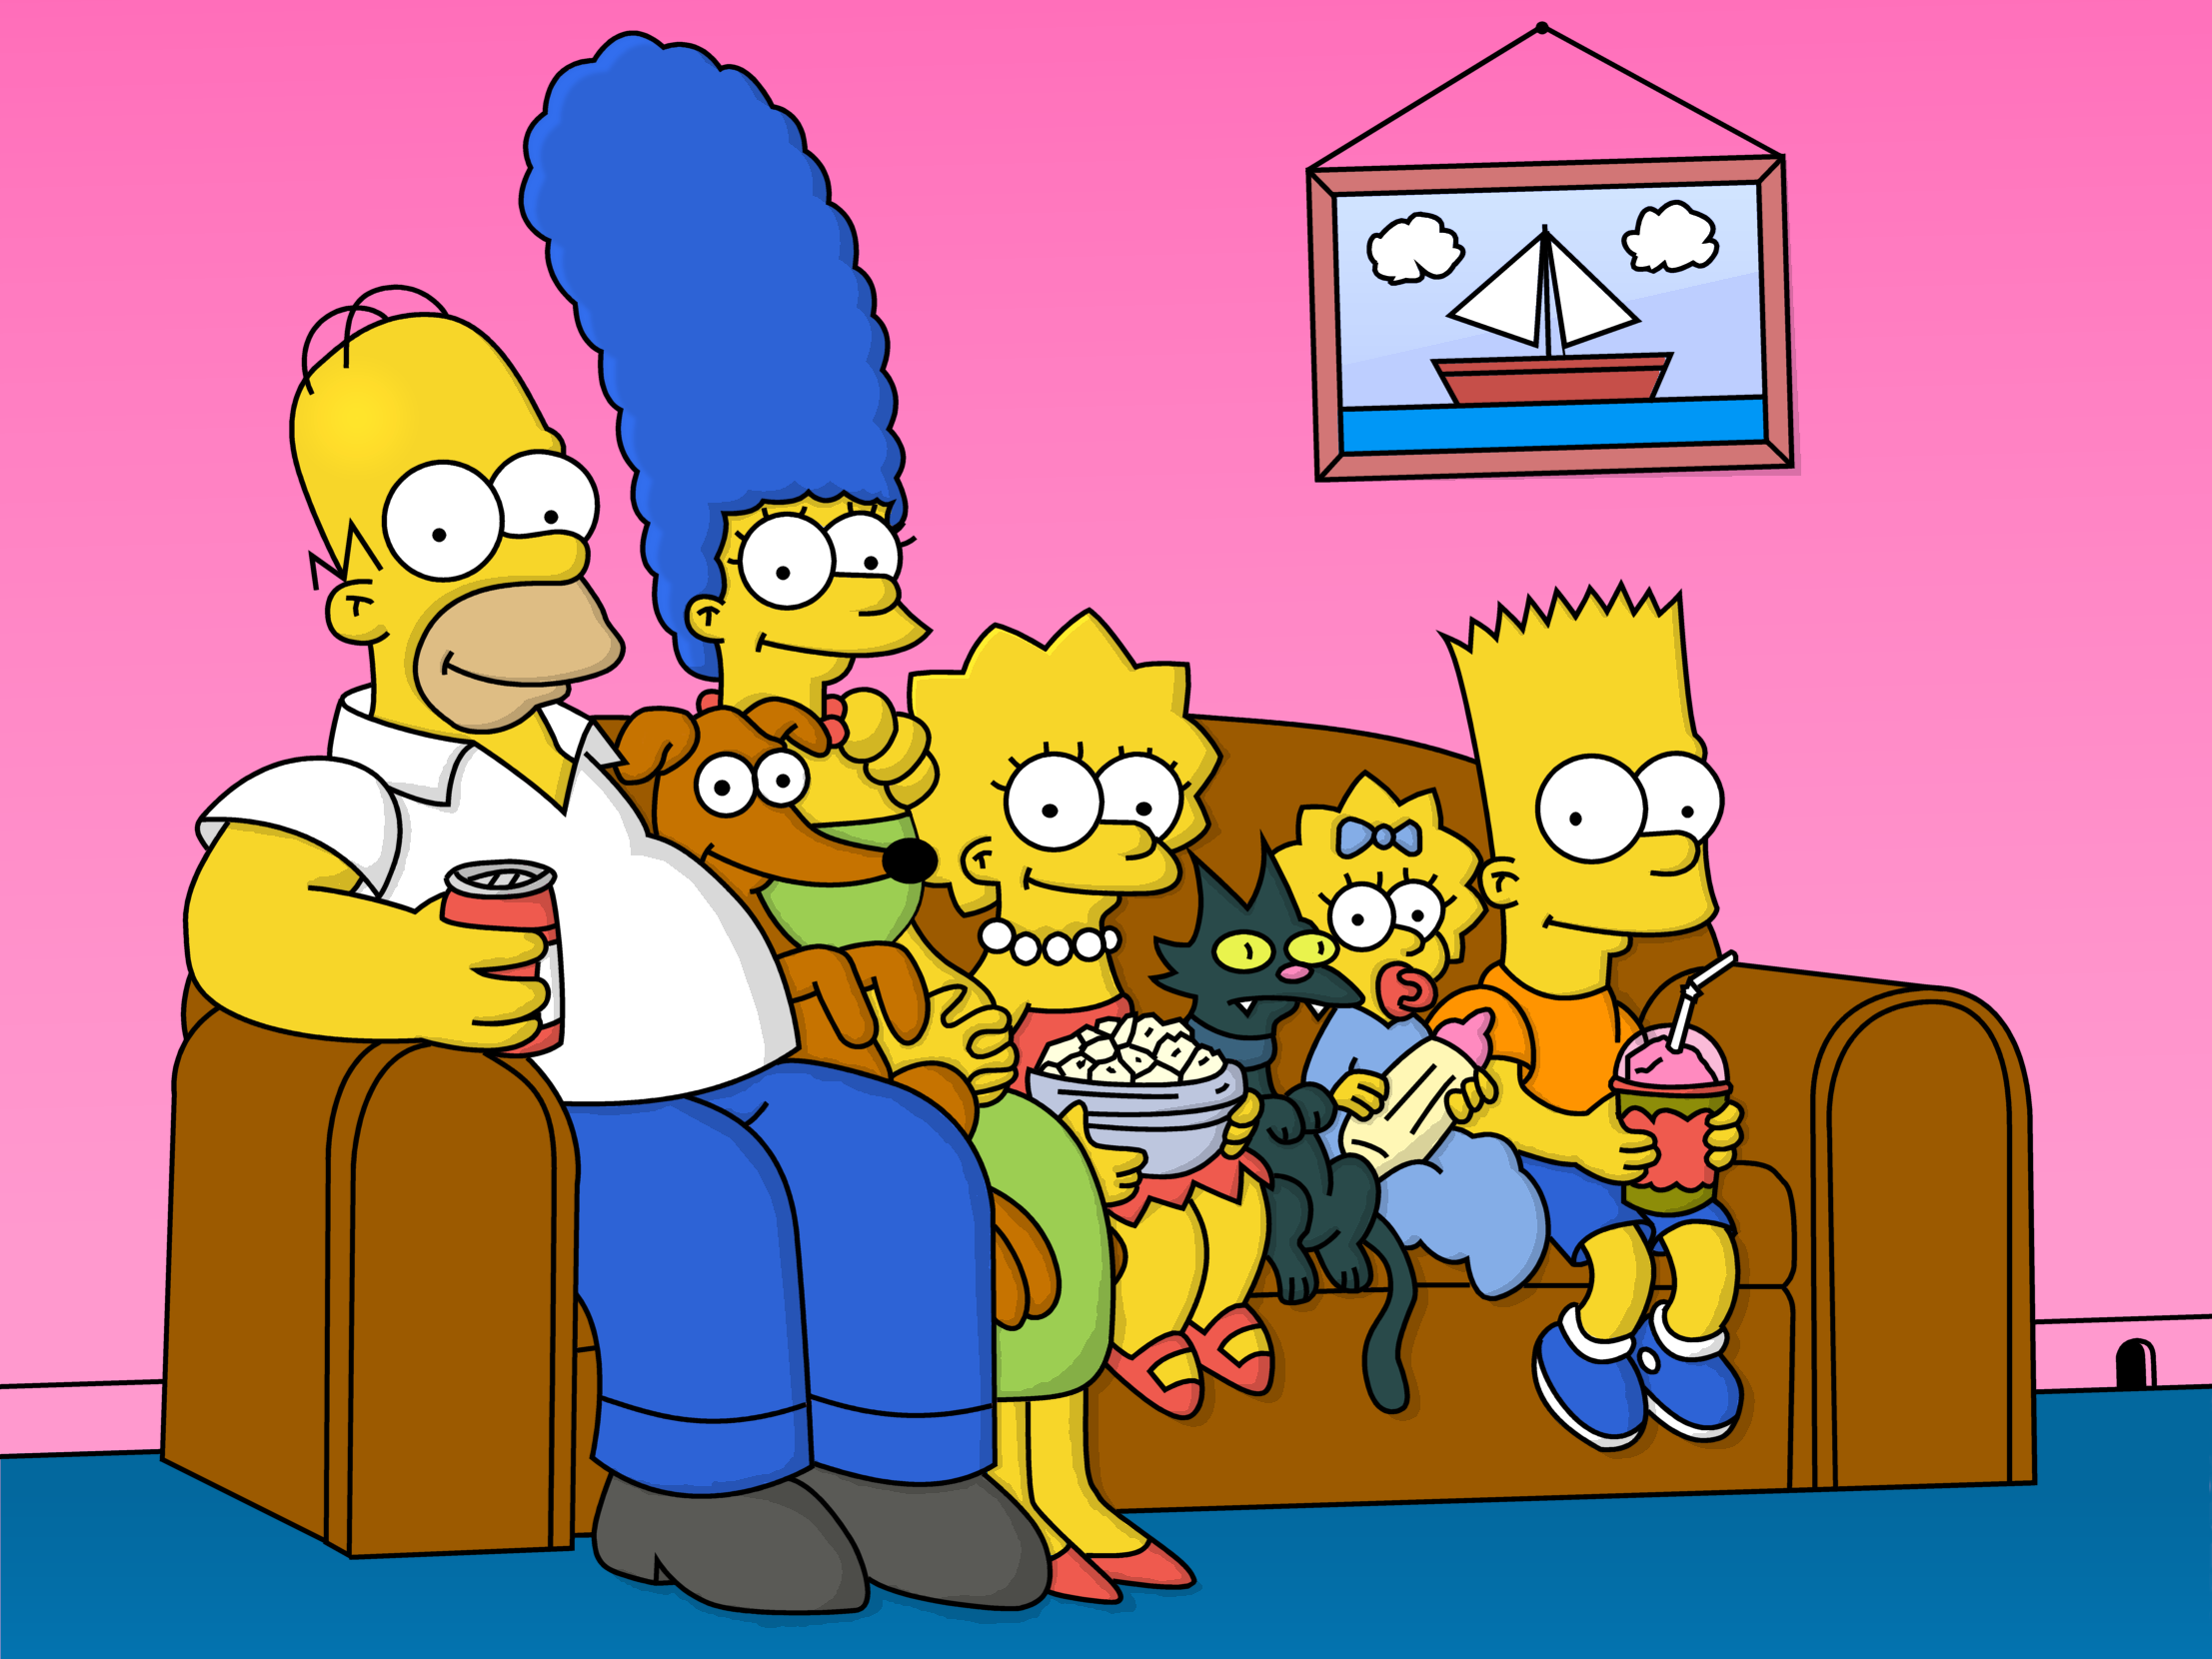 The Simpsons Family Wallpaper Image for MacBook